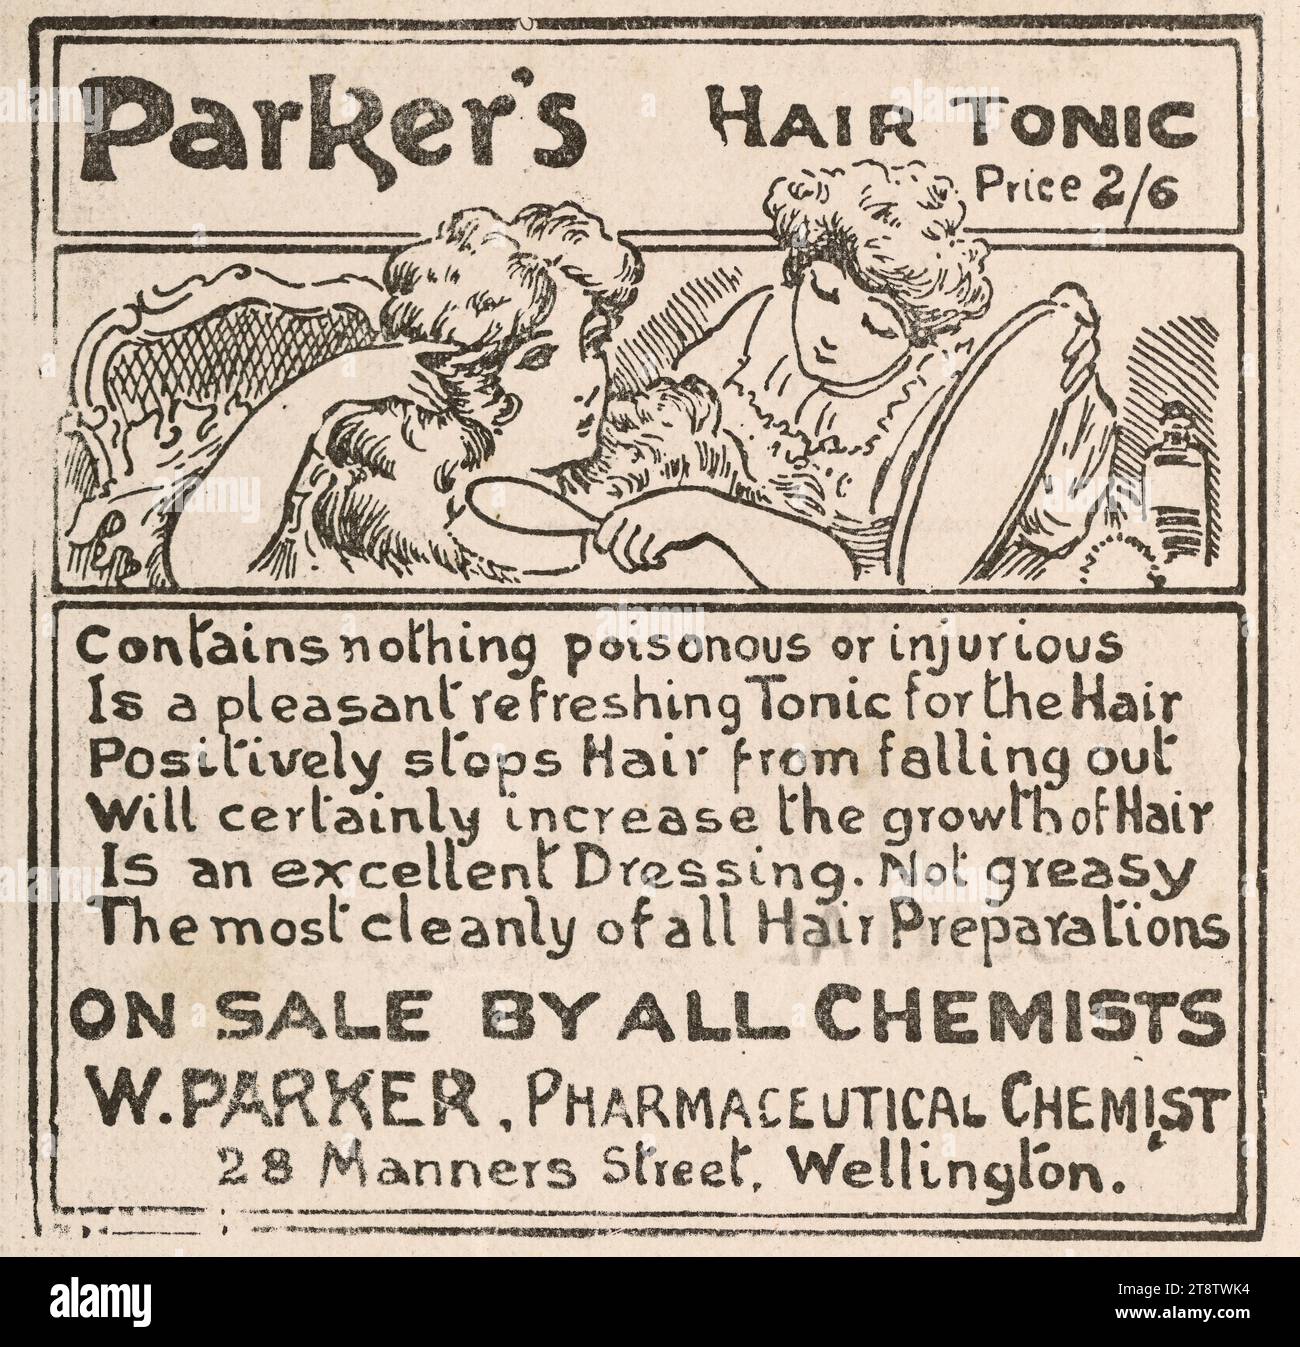 W Parker (Firm, Wellington, New Zealand): Parker's hair tonic. Price 2/6. Contains nothing poisonous or injurious / Is a pleasant refreshing tonic for the hair .. On sale by all chemists. W Parker, pharmaceutical chemist, 28 Manners Street, Wellington, New Zealand 1907, An advertisement for a hair tonic, inserted by W Parker, chemist and optician, of 28 Manners Street Wellington, New Zealand. Shows an illustration of a woman brushing her hair, and gazing at herself in a mirror held by her maid. Stock Photo